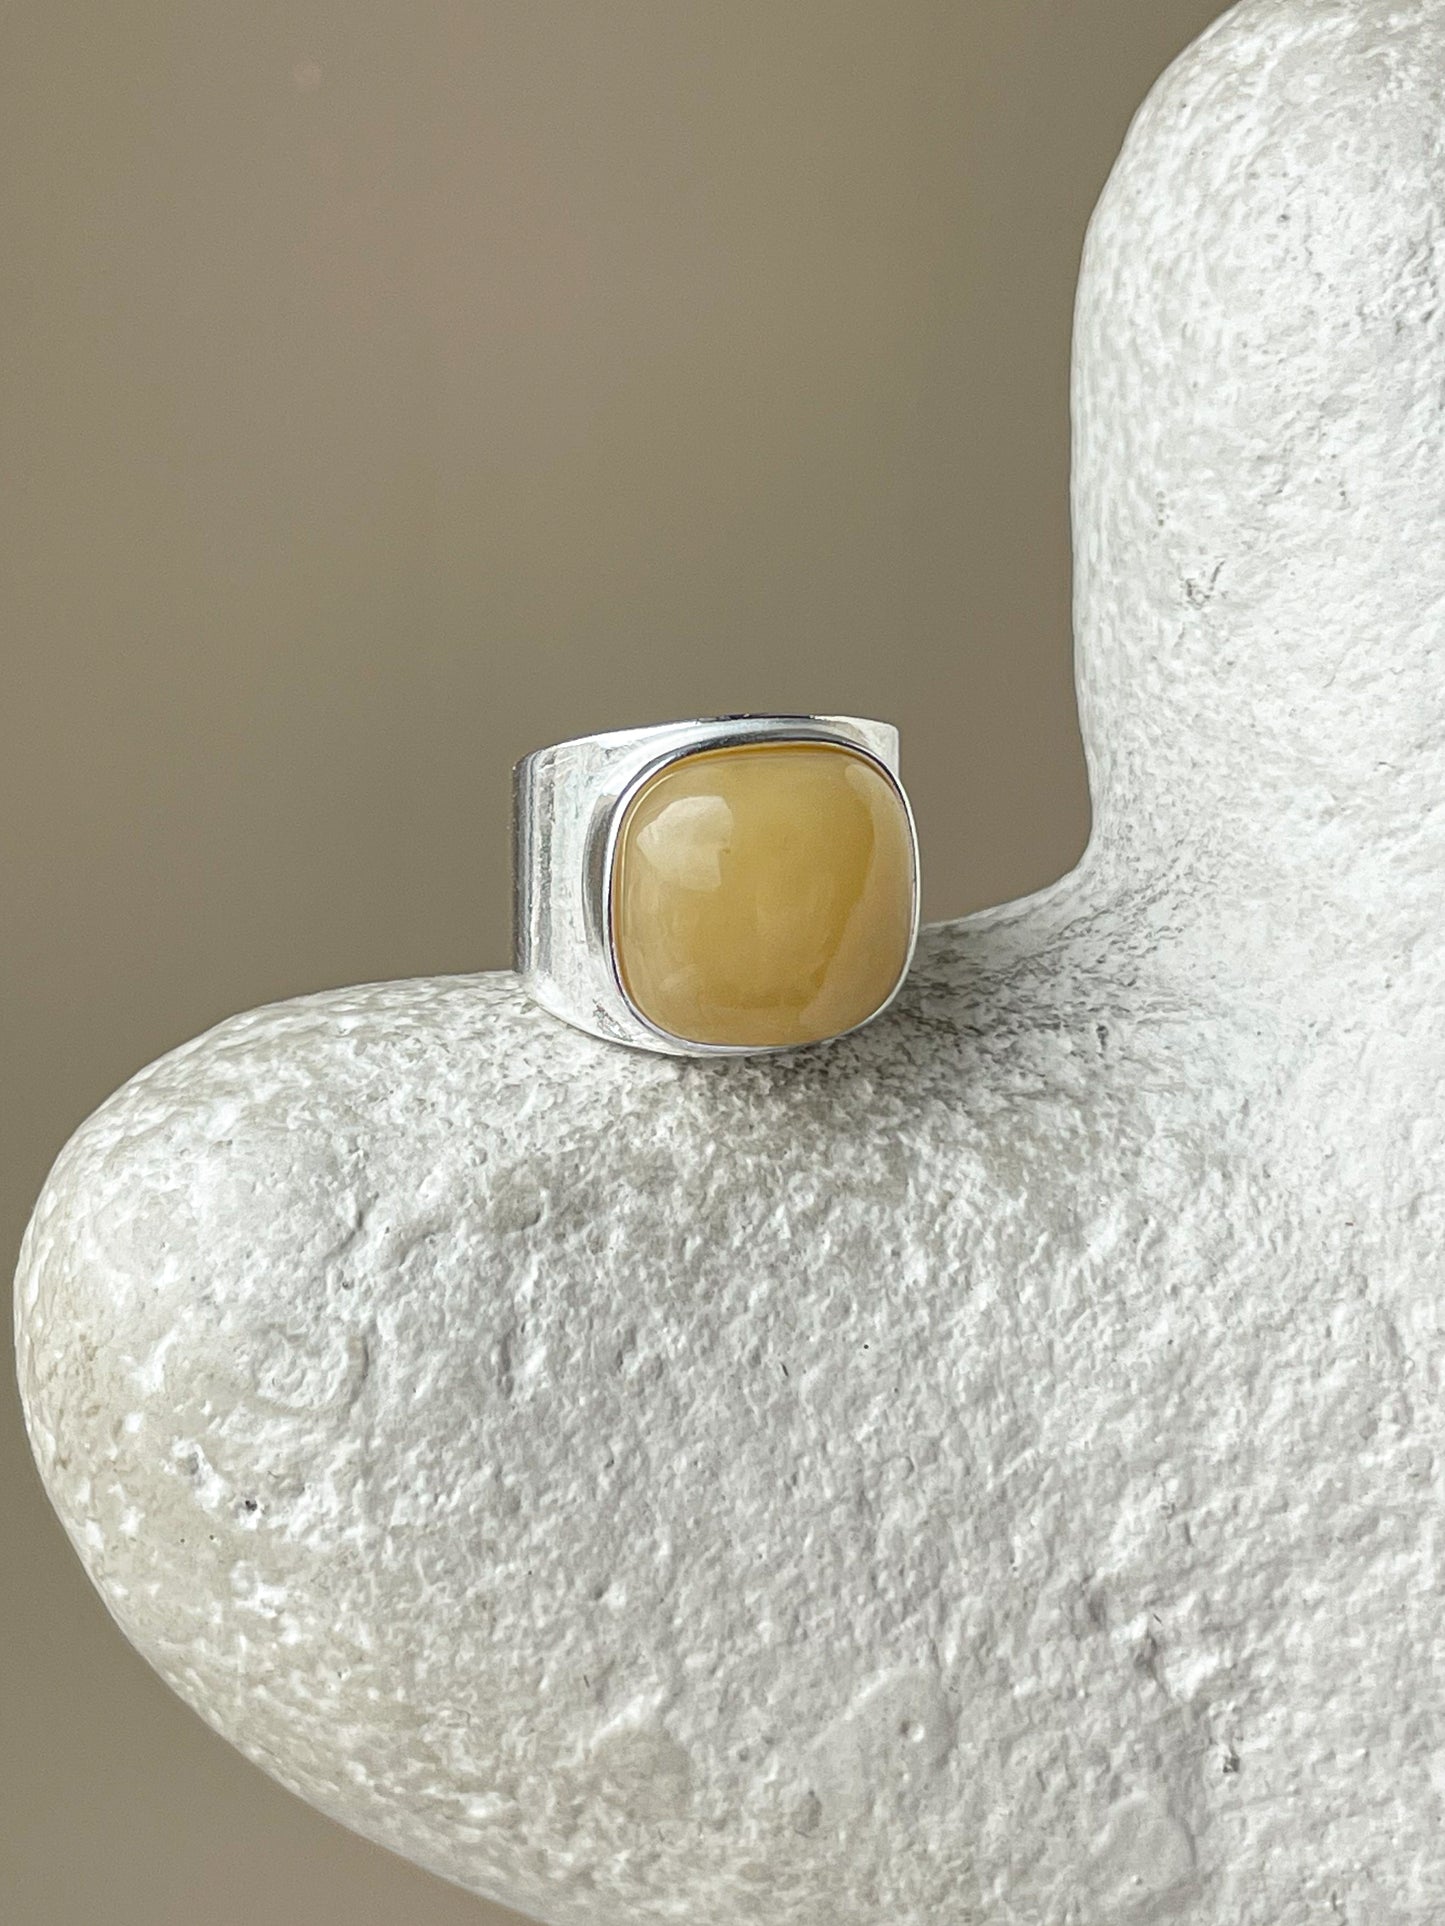 Matte amber ring - Sterling silver - Statement ring collection - Size 6 3/4